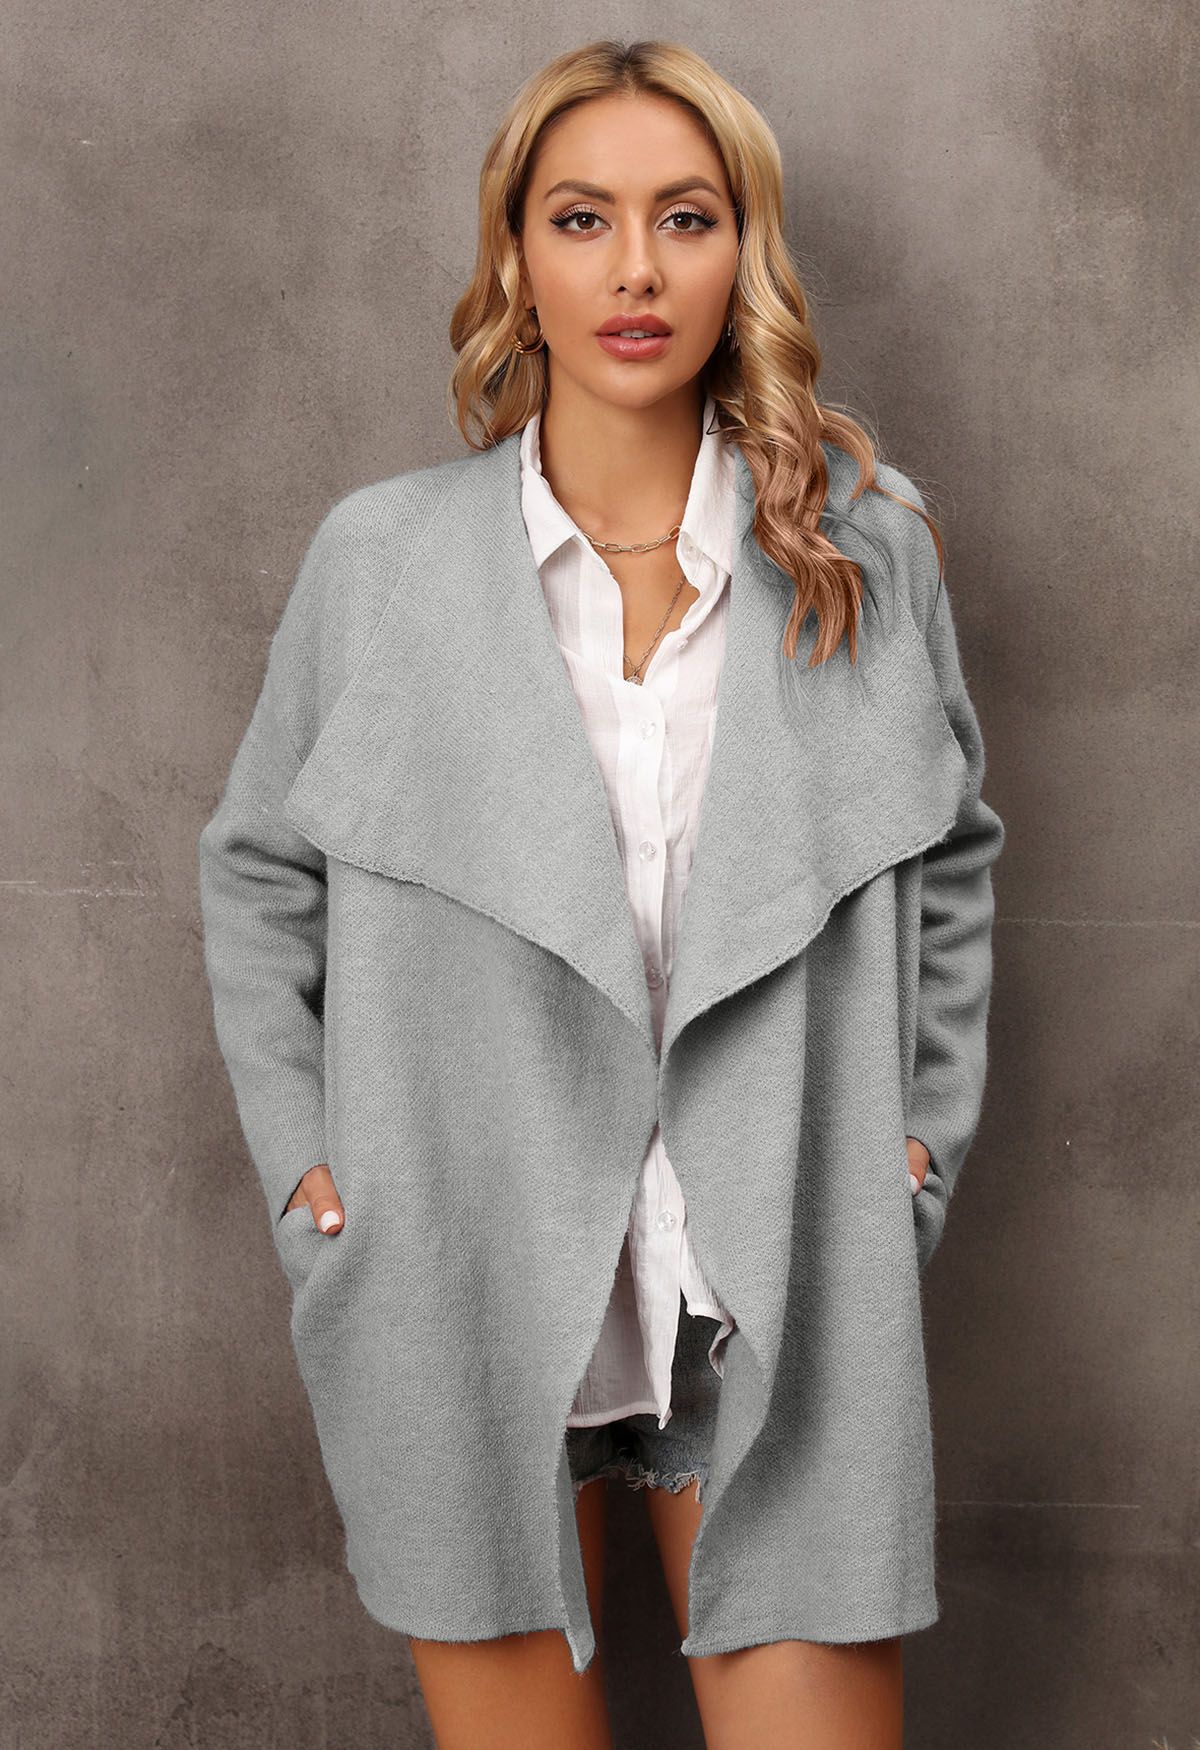 Wide Lapel Loose Knit Cardigan in Grey - Retro, Indie and Unique Fashion